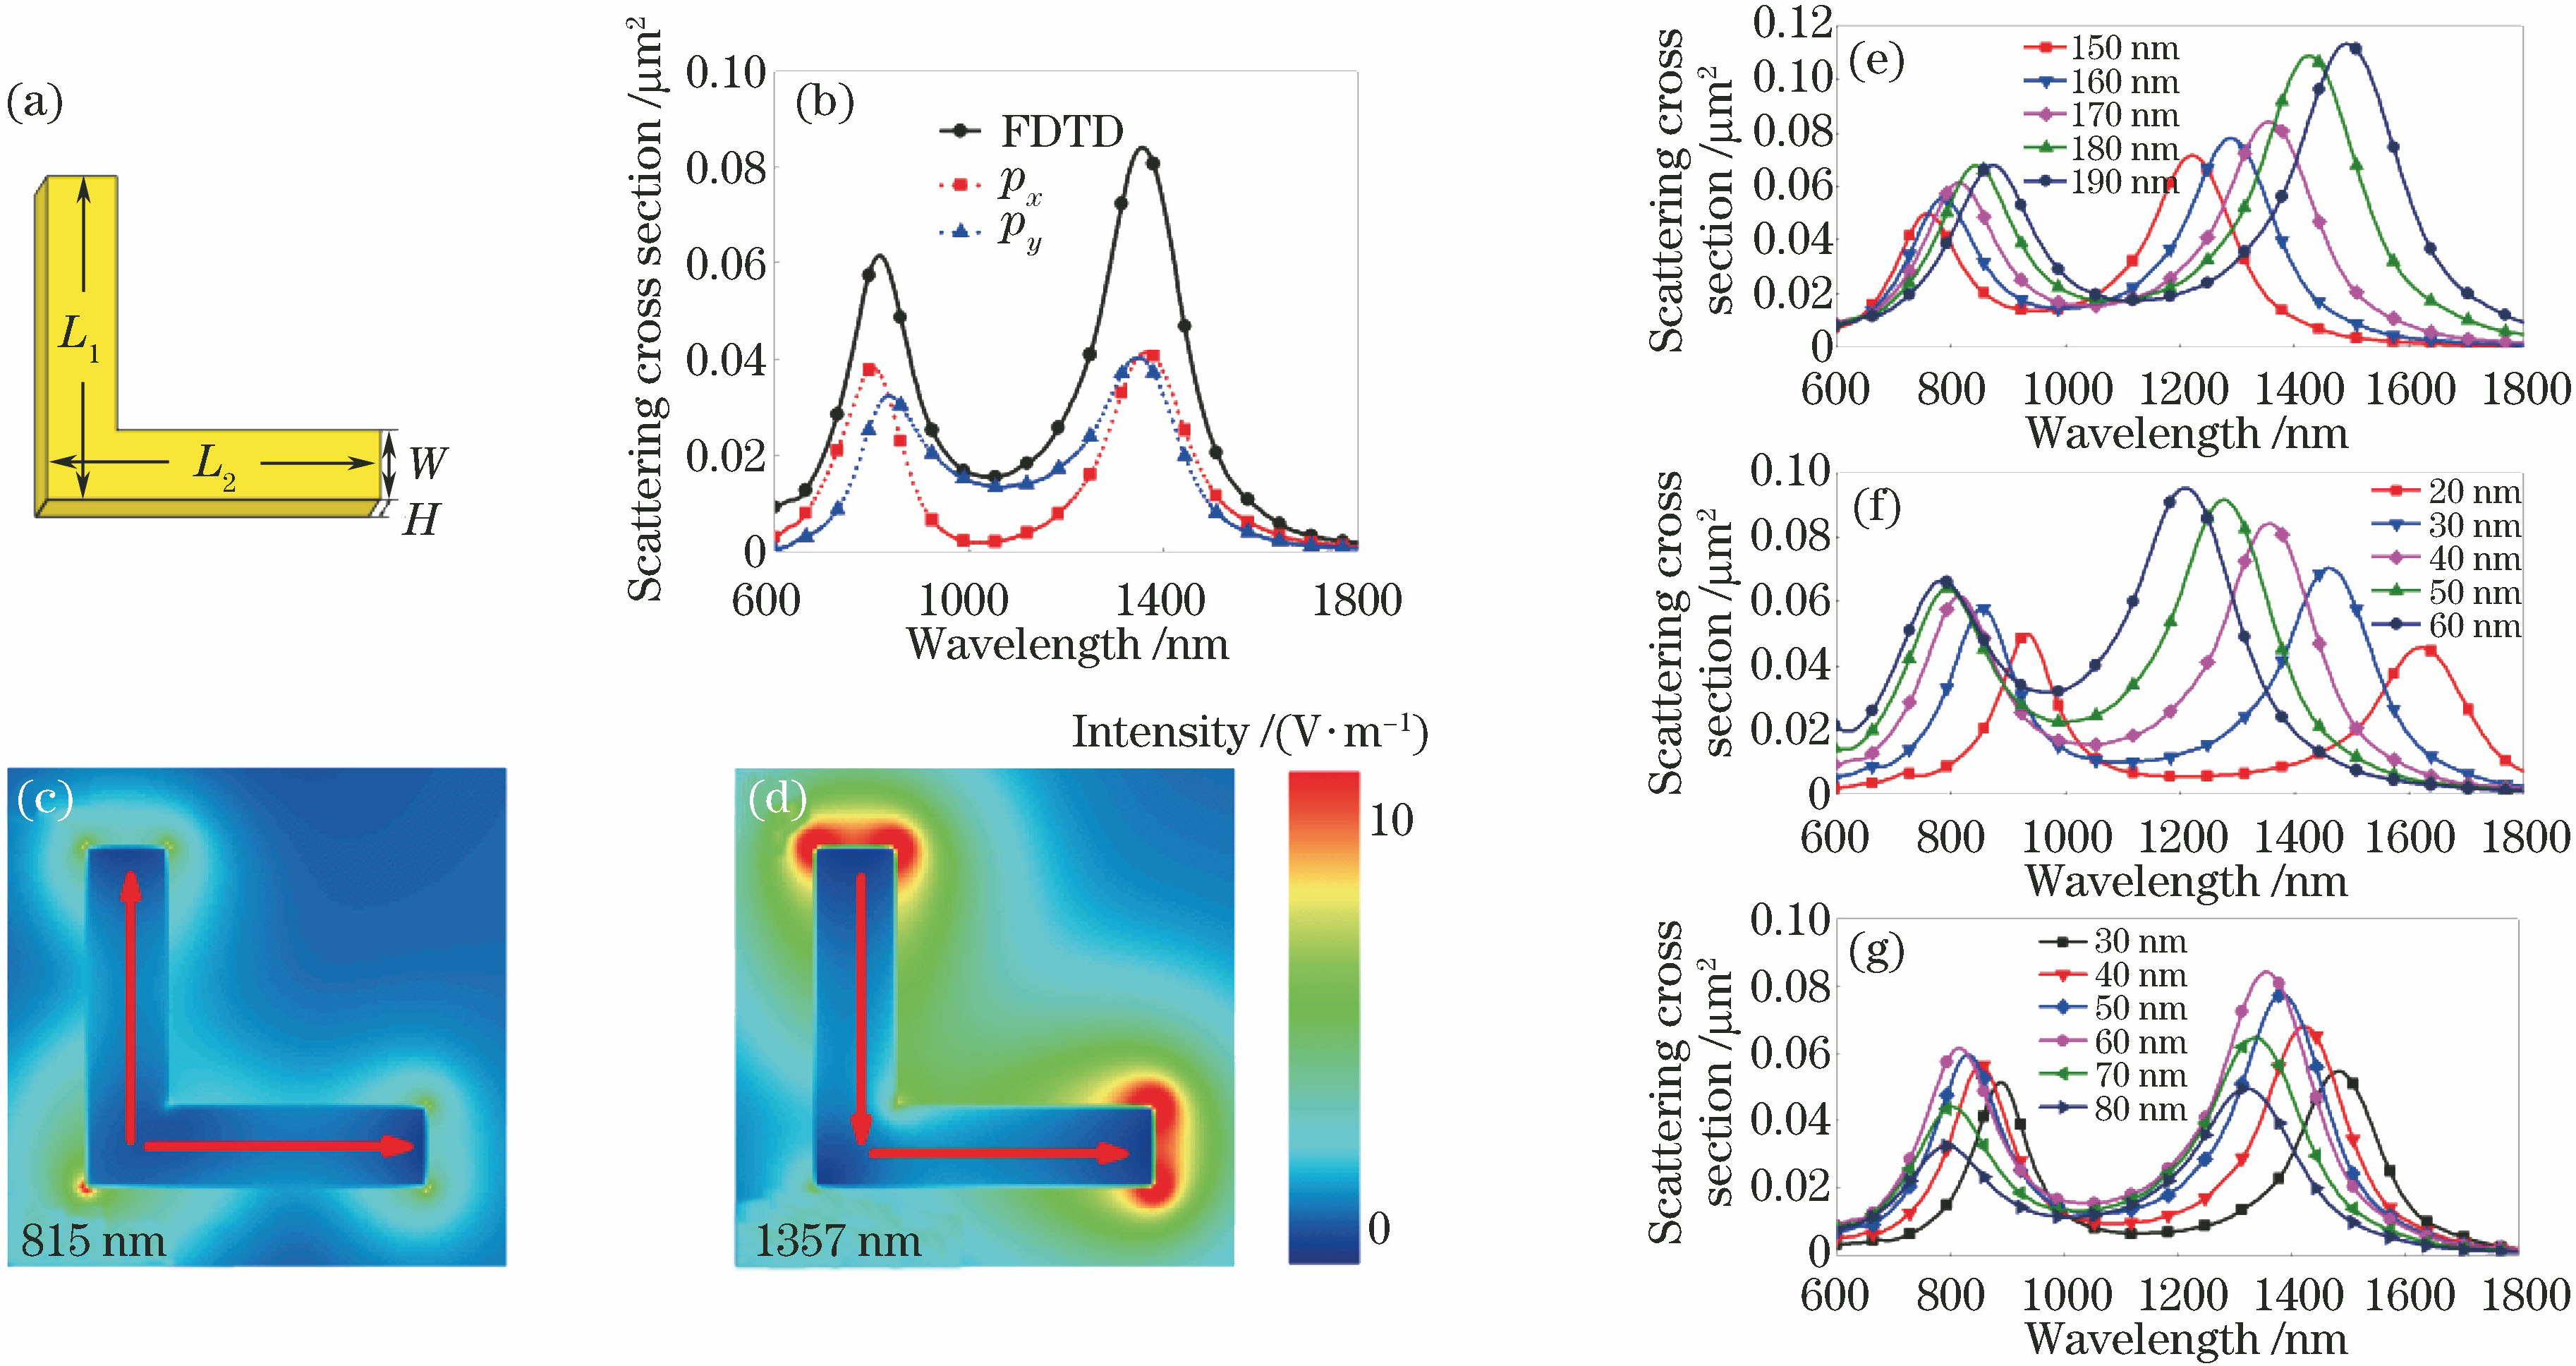 Optical responses of single L-shaped gold nanorod. (a) Schematic of L-shaped gold nanorod; (b) scattering spectrum of nanorod (solid line) and contribution of electric dipole scattering in x and y directions (dashed line); near-field distribution characteristics of (c) anti-bonding and (d) bonding localized surface plasmon resonances; (e) variation in scattering spectrum with length of nanorod; (f) variation in scattering spectrum with width of nanorod; (g) variation in scattering spectrum with